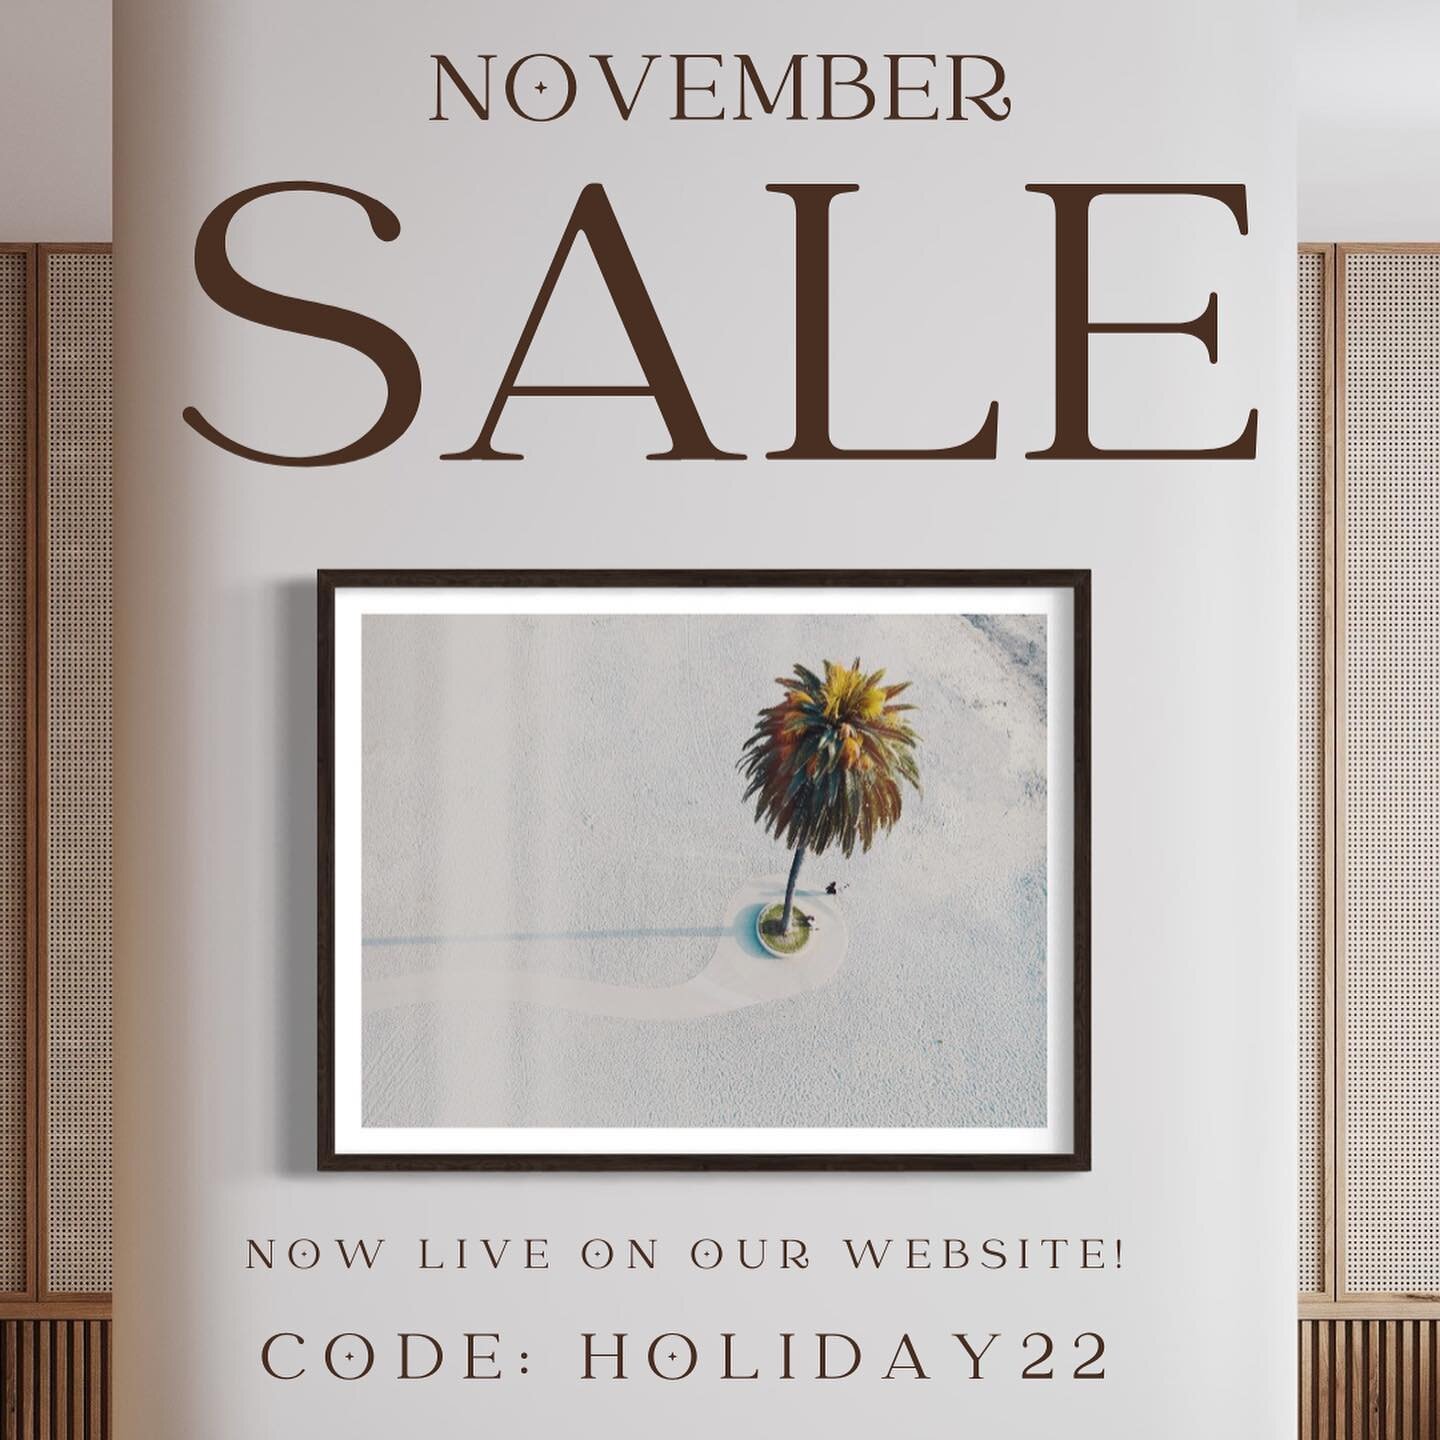 Framed prints for sale just in time for the holidays ❤️
Get 20% off with Code: HOLIDAY22 good for the month of November.
.
.
.
#fineartphotography #carlsbad #encinitas #oceanside #homedecor